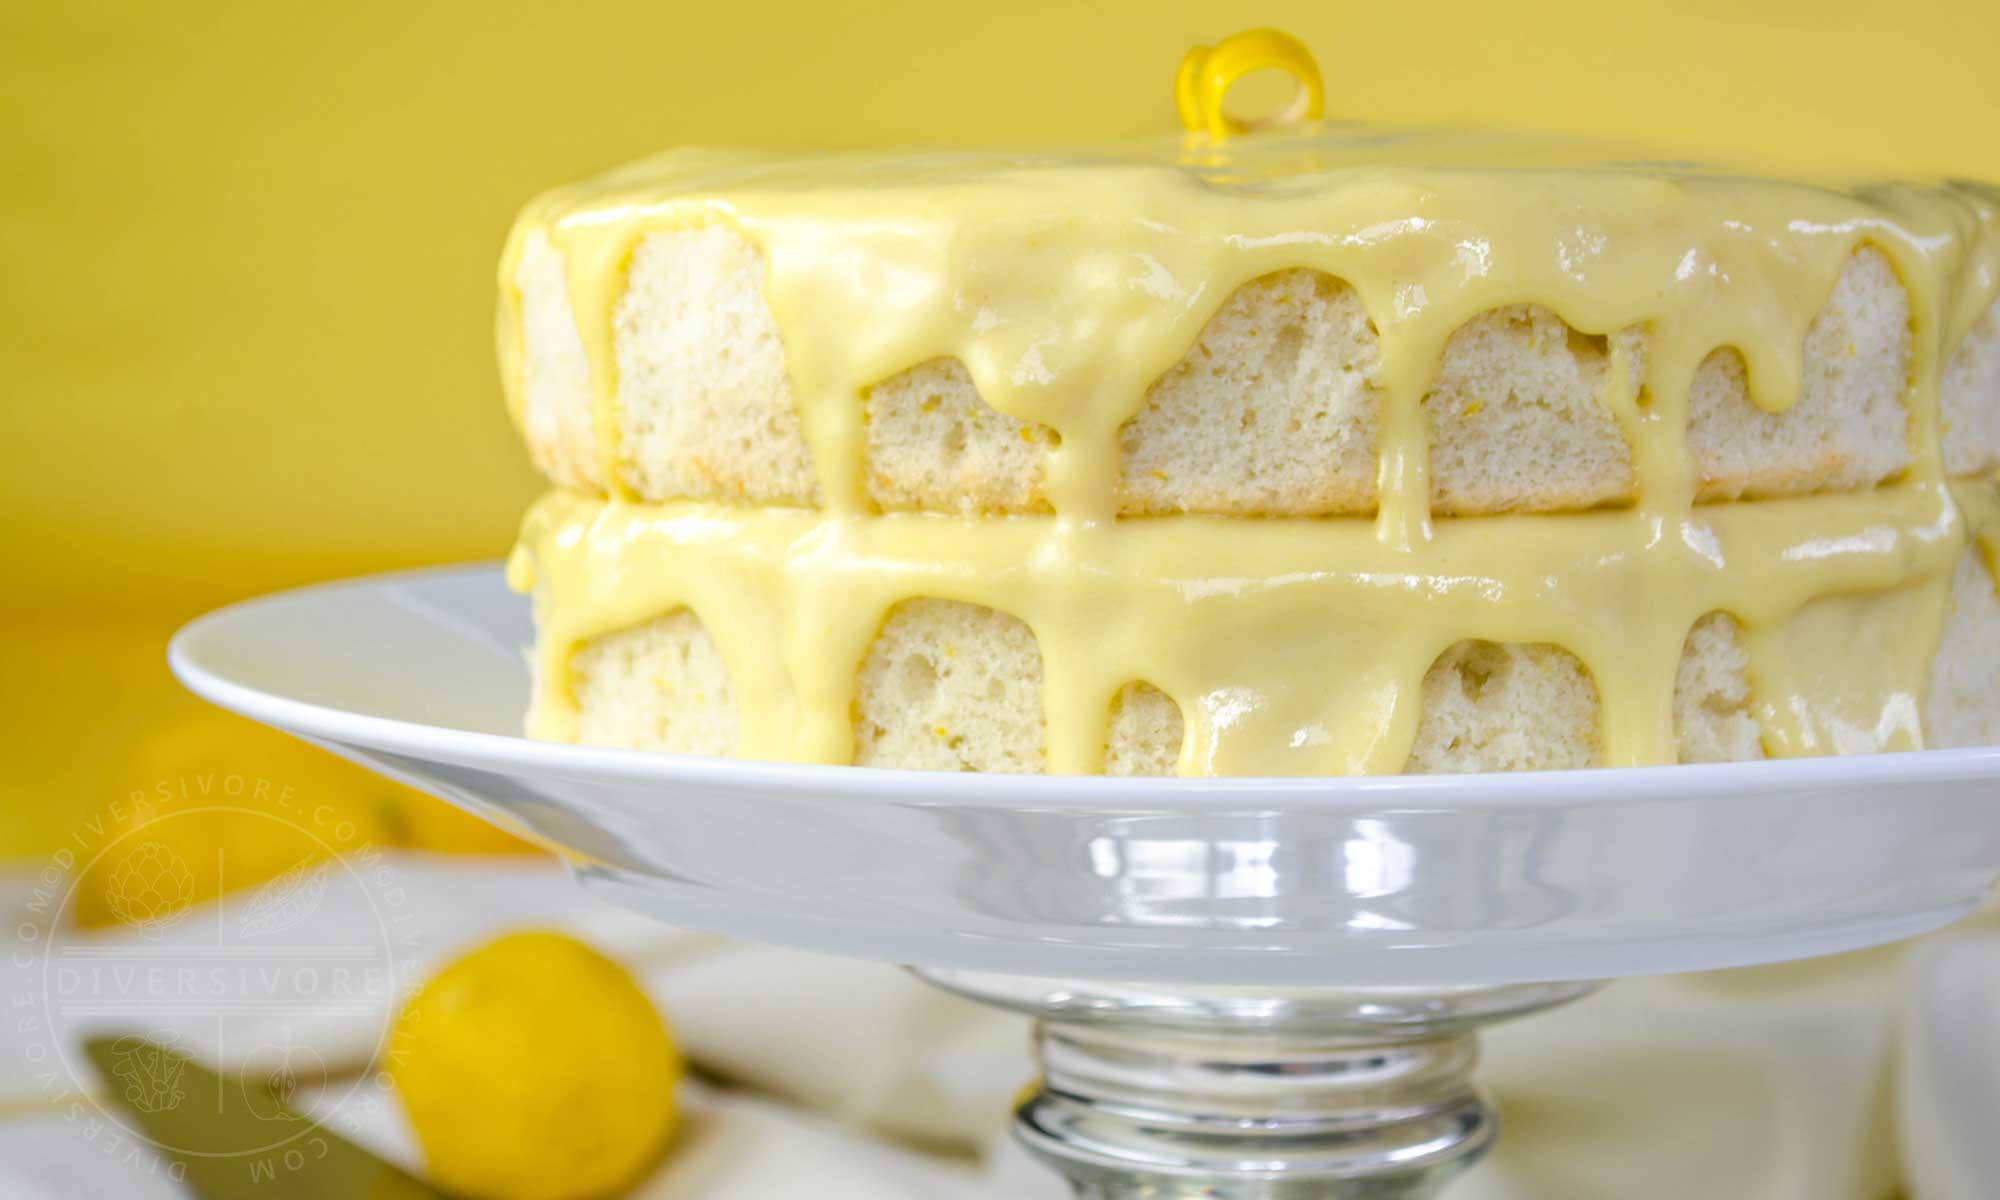 Featured image for “Dairy-Free Lemon “Whip” Cake”